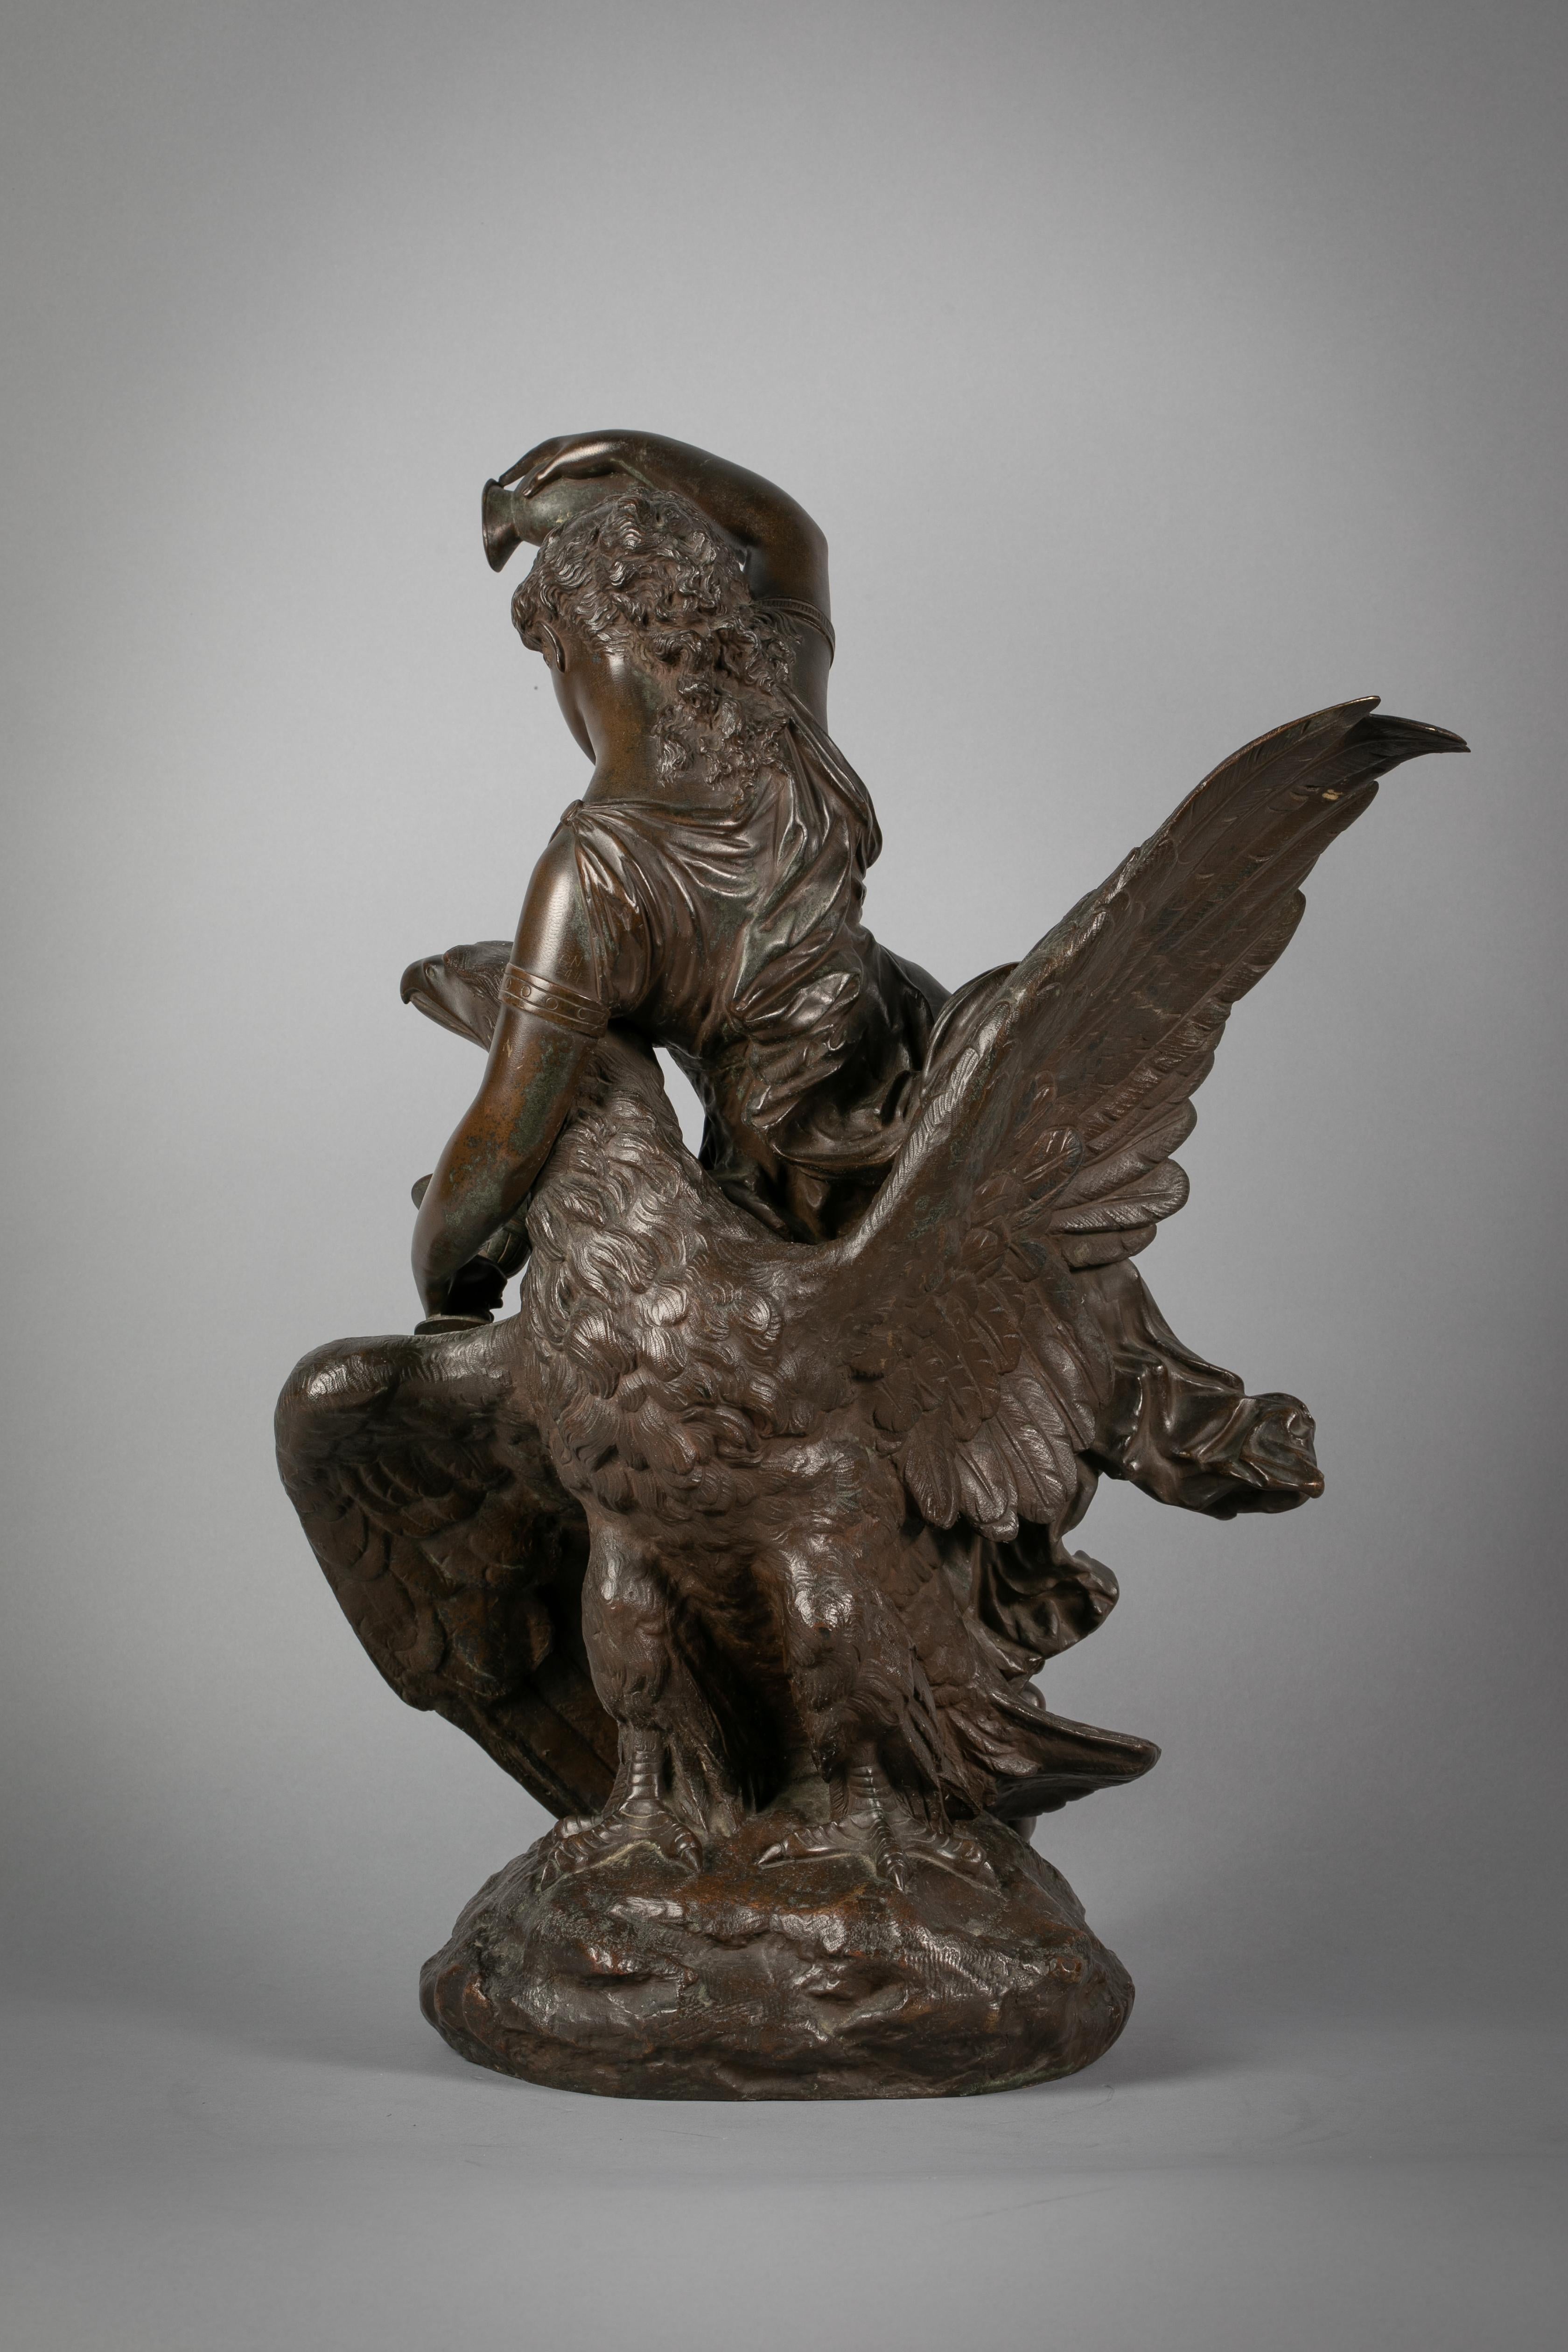 French bronze of Hebe and Jupiter Disguised as an Eagle, by Louis Charles Hippolyte Buhot.

Louis-Charles-Hippolyte Buhot (1815-1865) was a pupil of David d'Angers. Buhot entered the Ecole des Beaux Arts at the age of seventeen. It has been